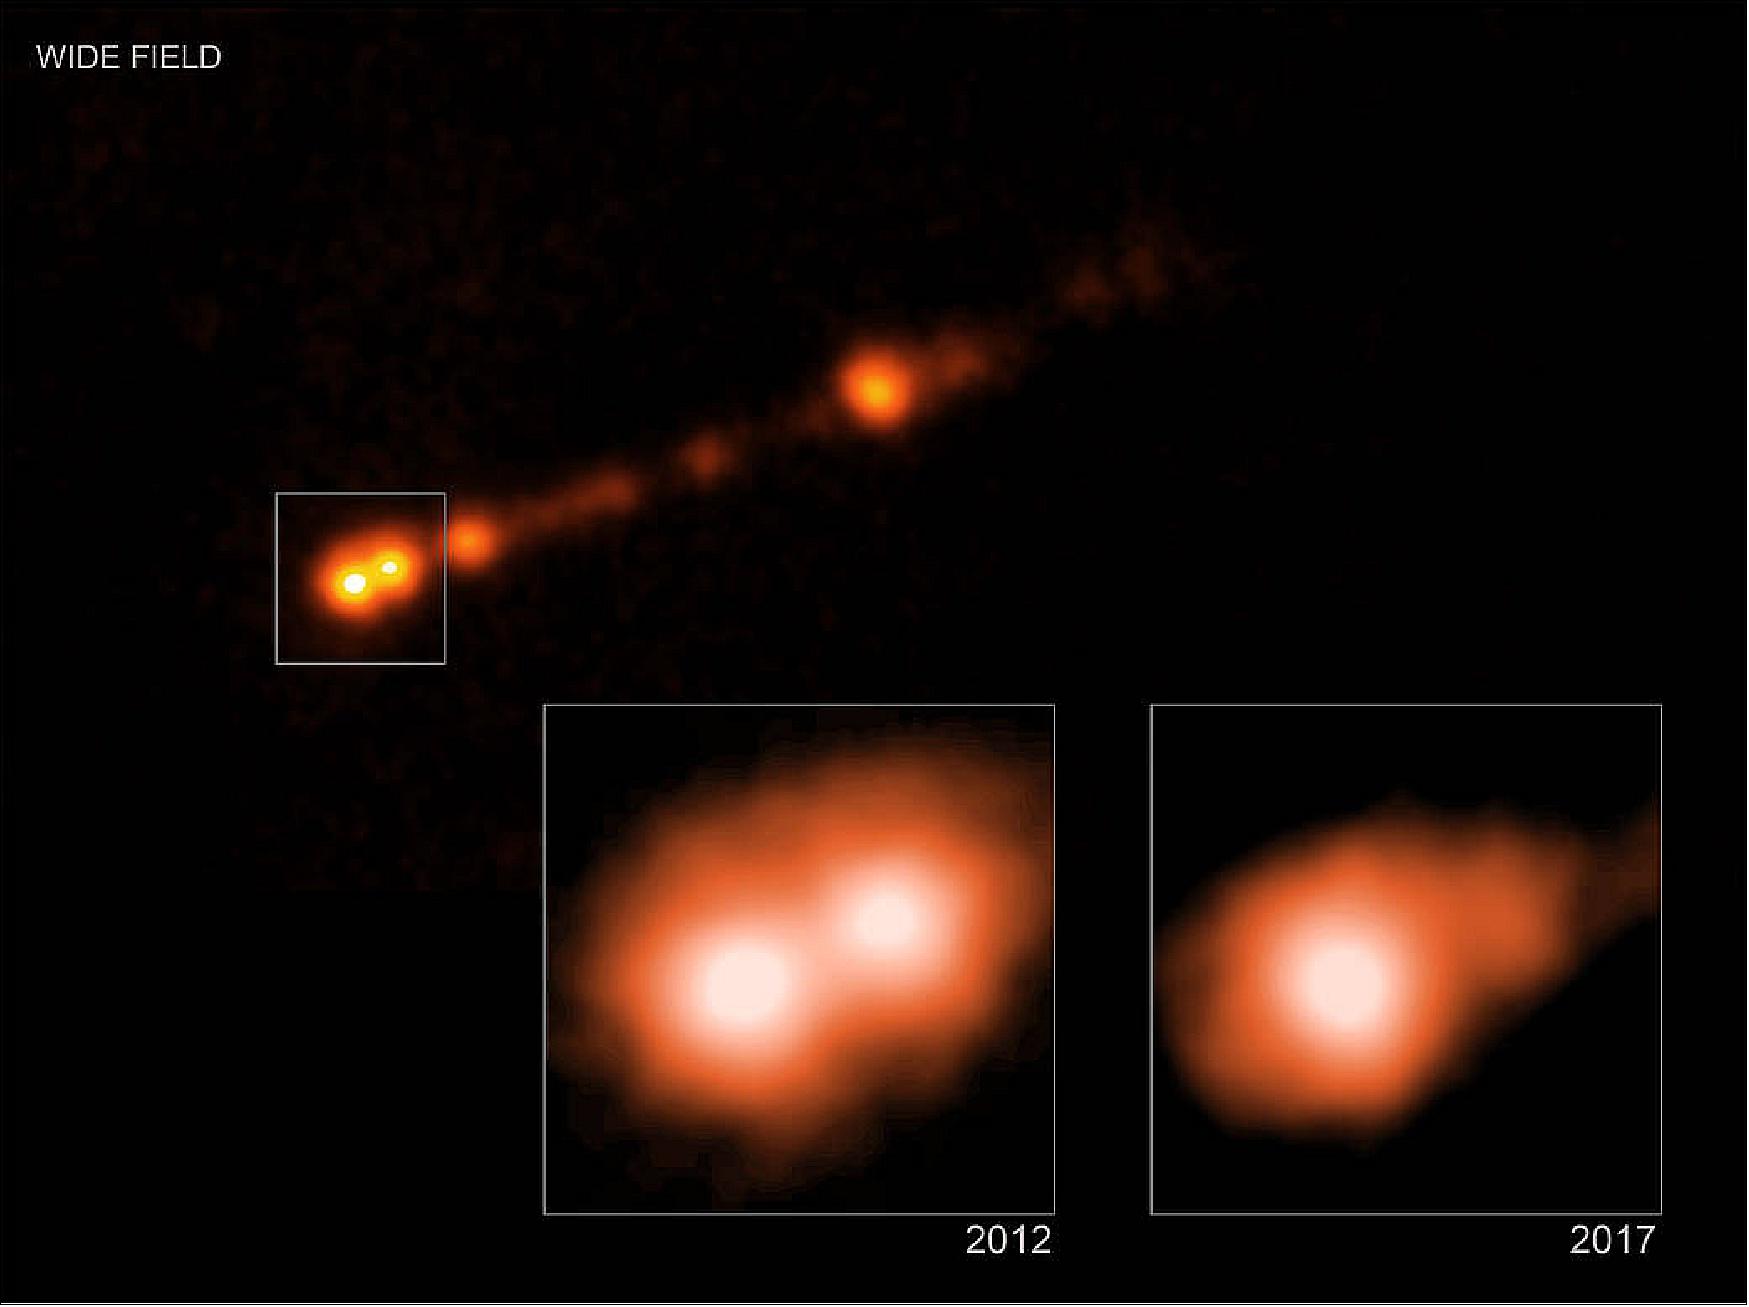 Figure 27: Using NASA’s Chandra X-ray Observatory, astronomers have seen that the famous giant black hole in Messier 87 is propelling particles at speeds greater than 99% of the speed of light (image credit: NASA/CXC/SAO/B, Brad Snios, et al.)